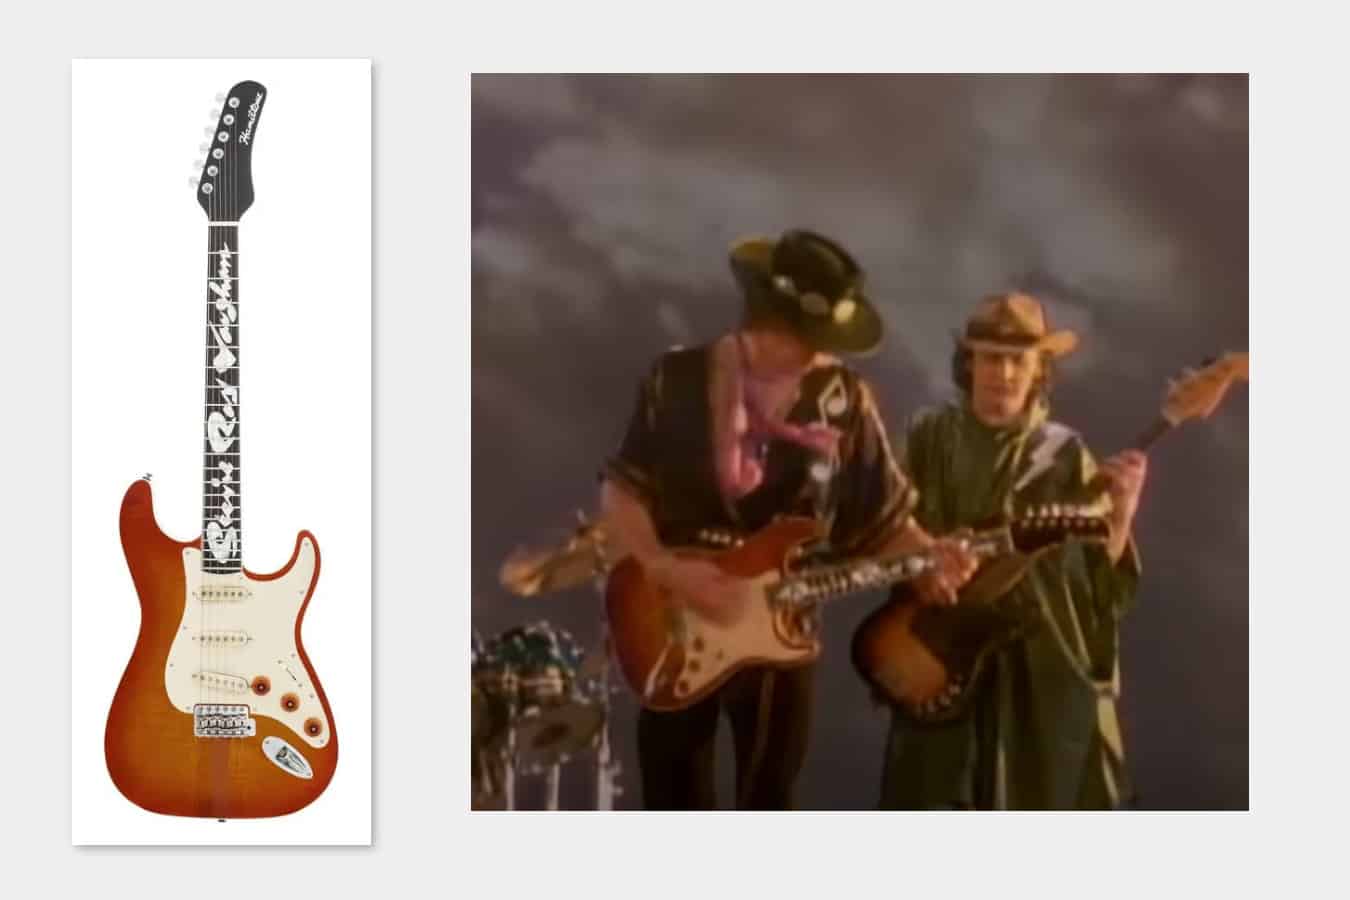 The guitar that Stevie used in the 